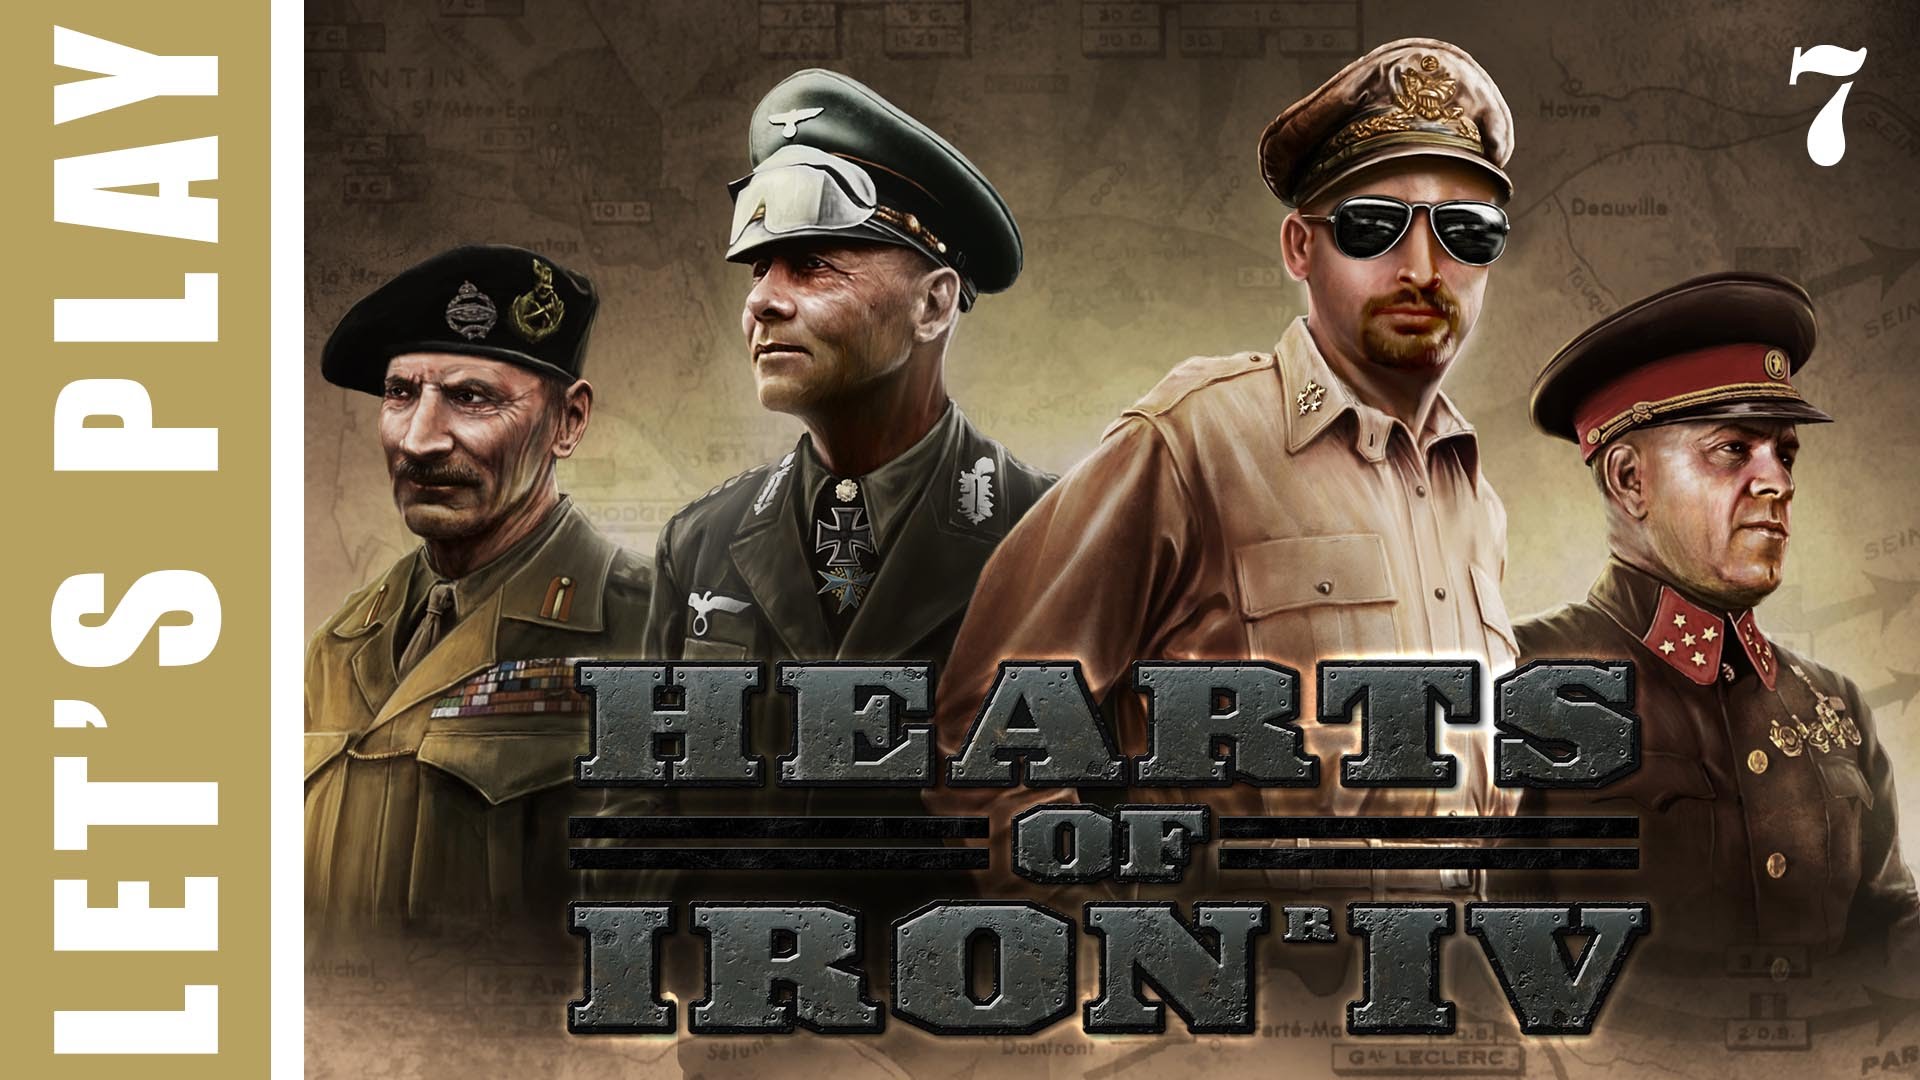 Hearts of Iron IV Germany Wins World War 2 Let’s Play 7